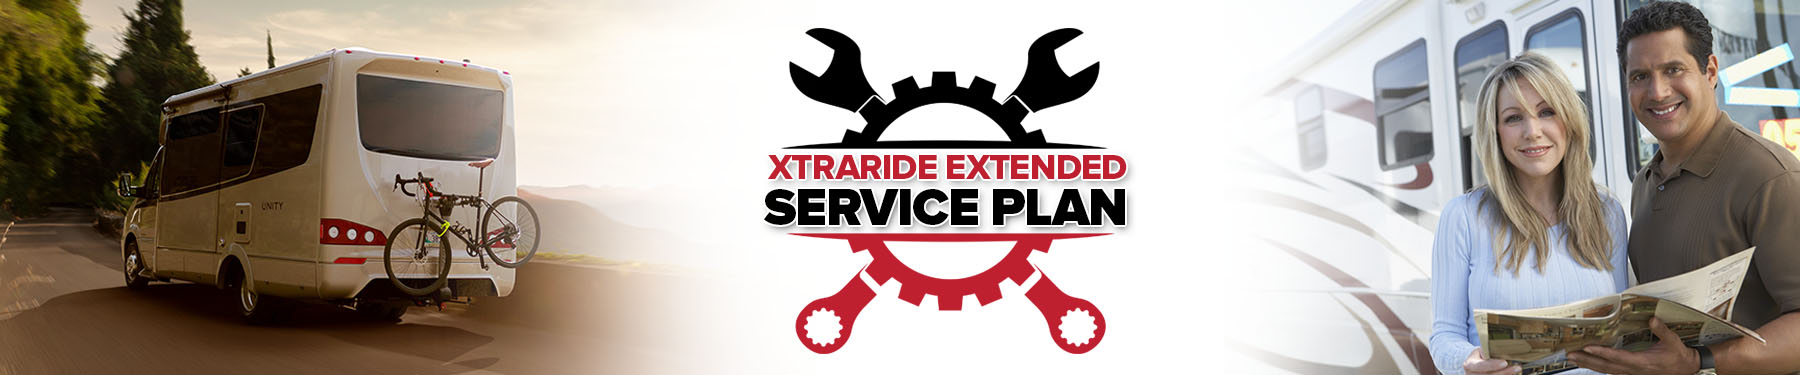 Xtra Ride Extended Service Plan